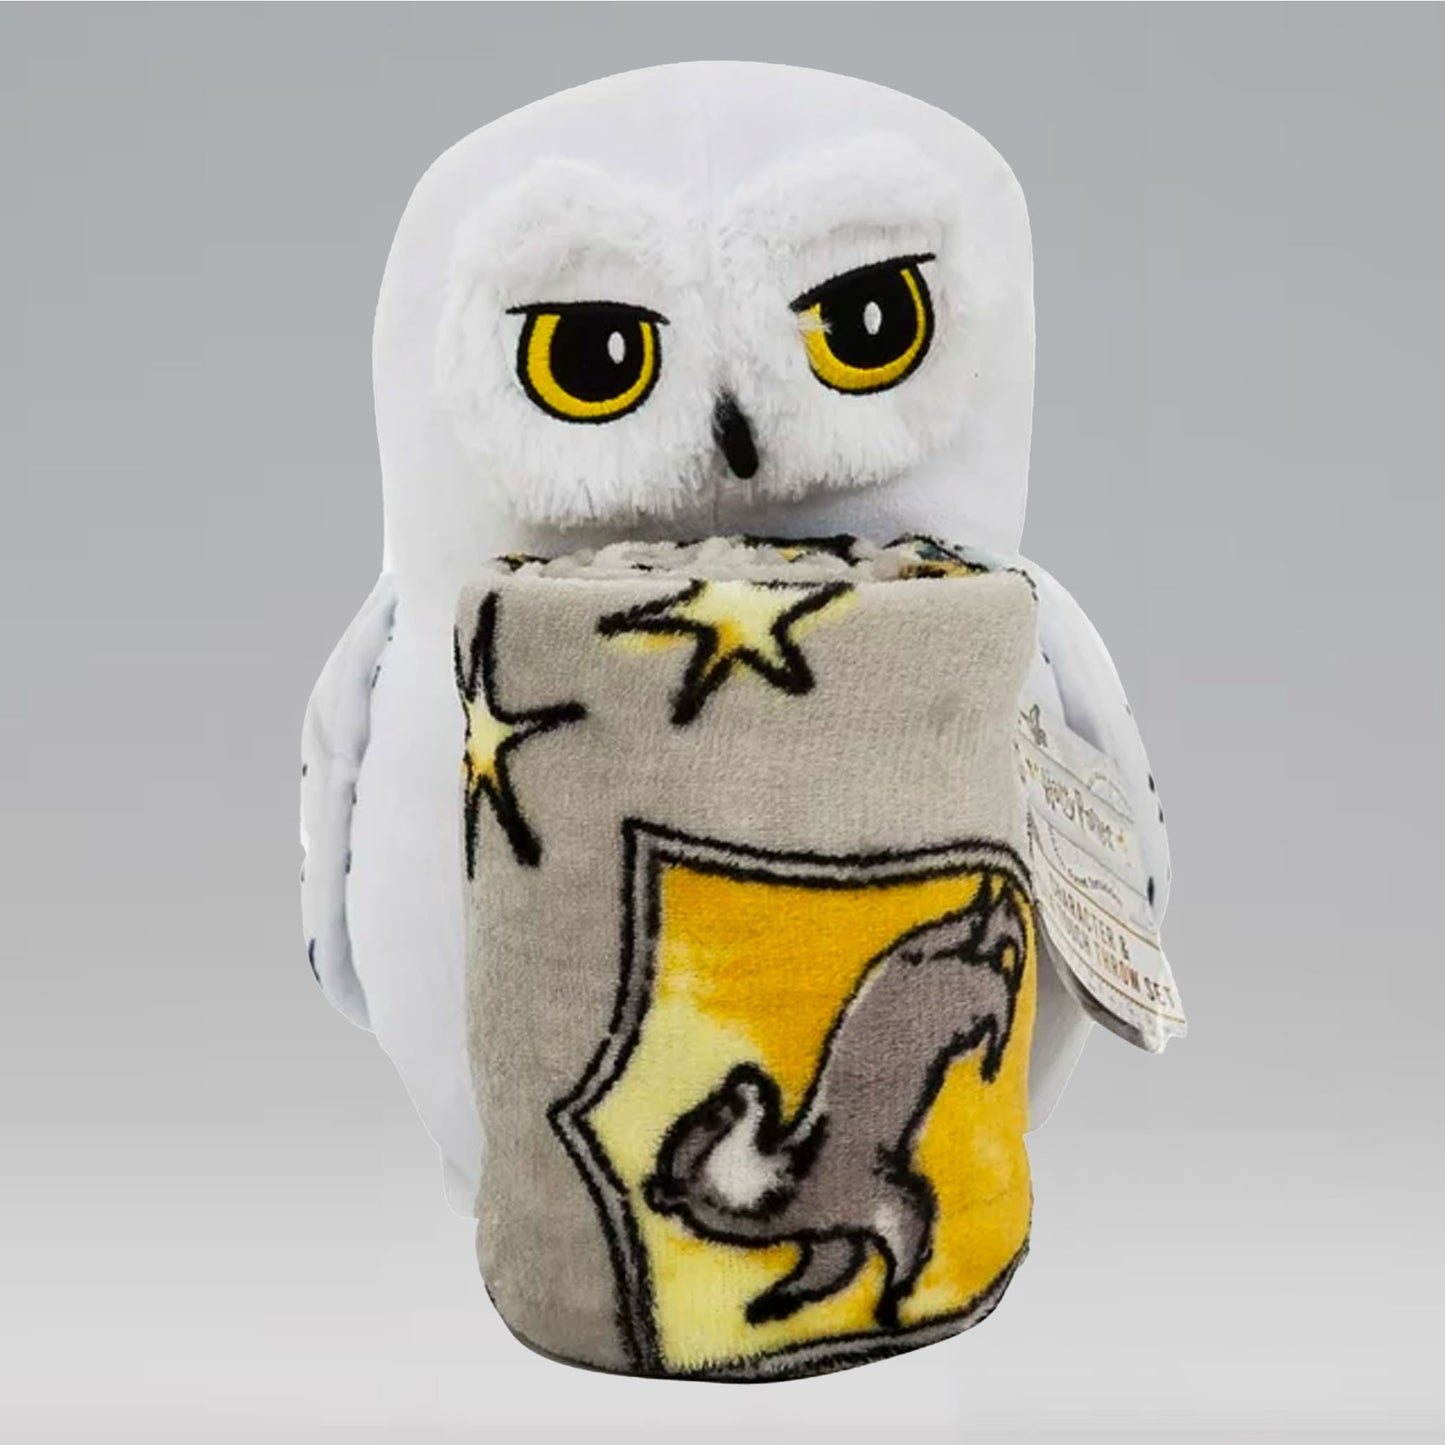 Hedwig Collector plush